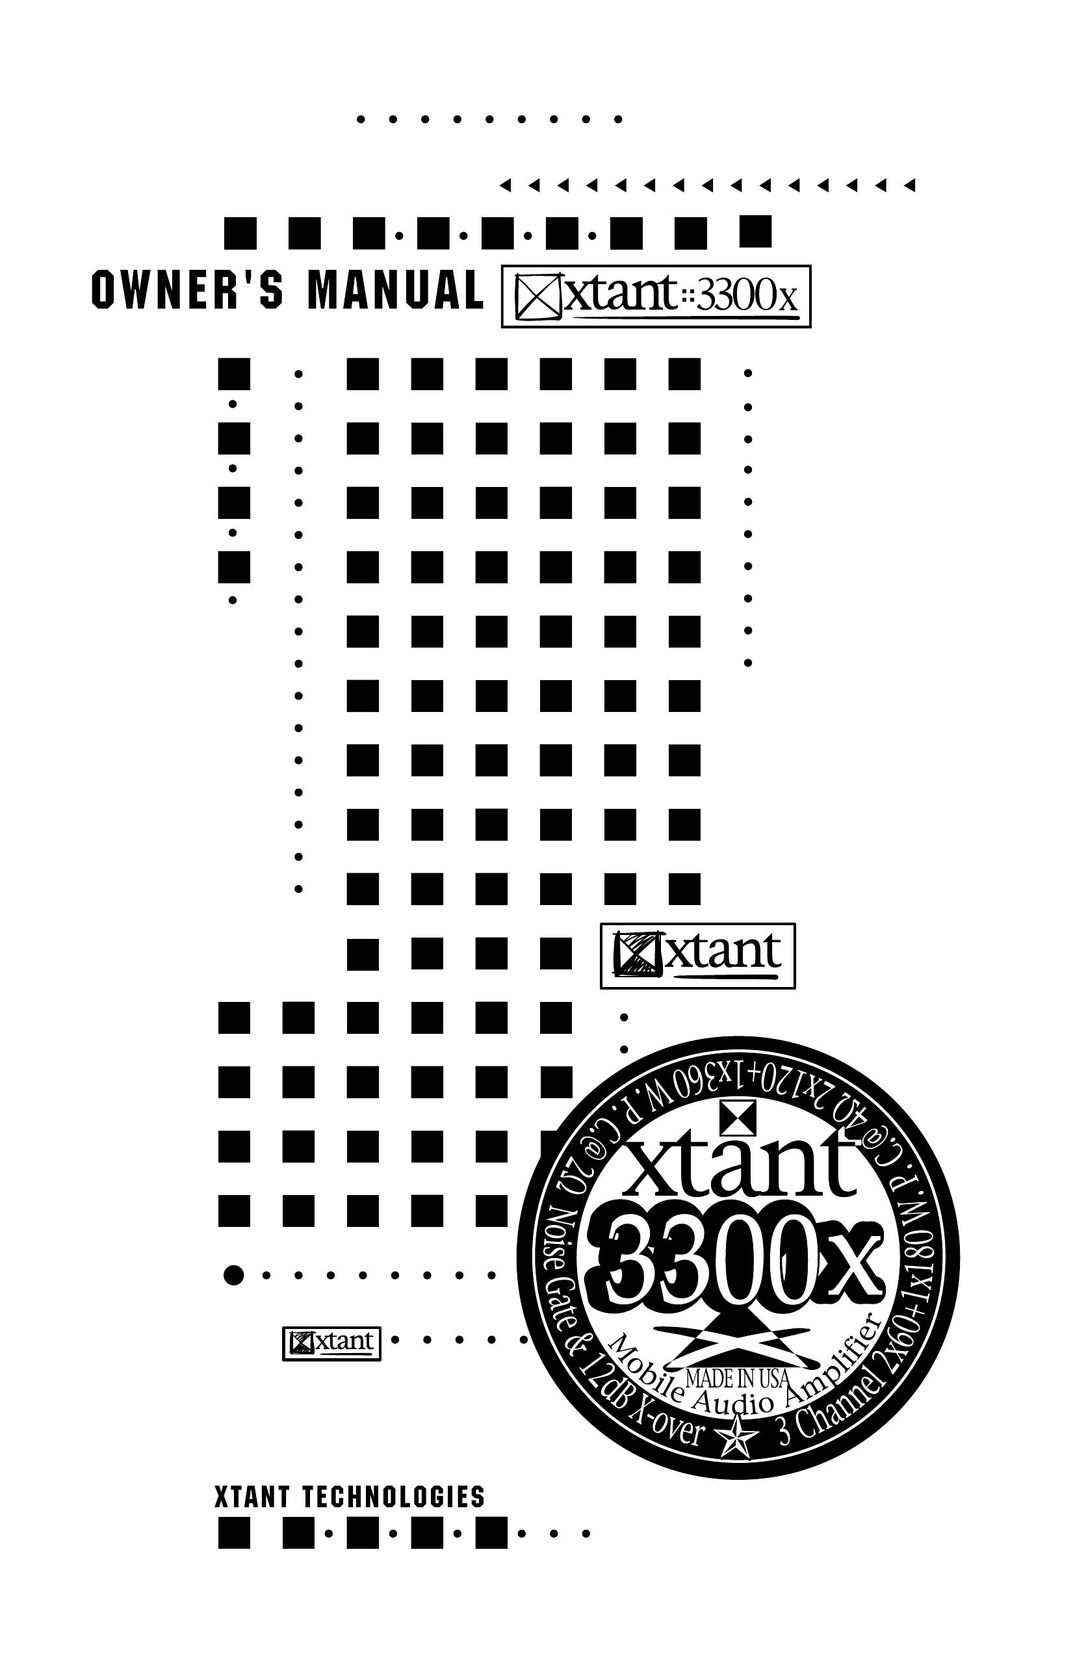 Xtant 3300x Stereo Amplifier User Manual